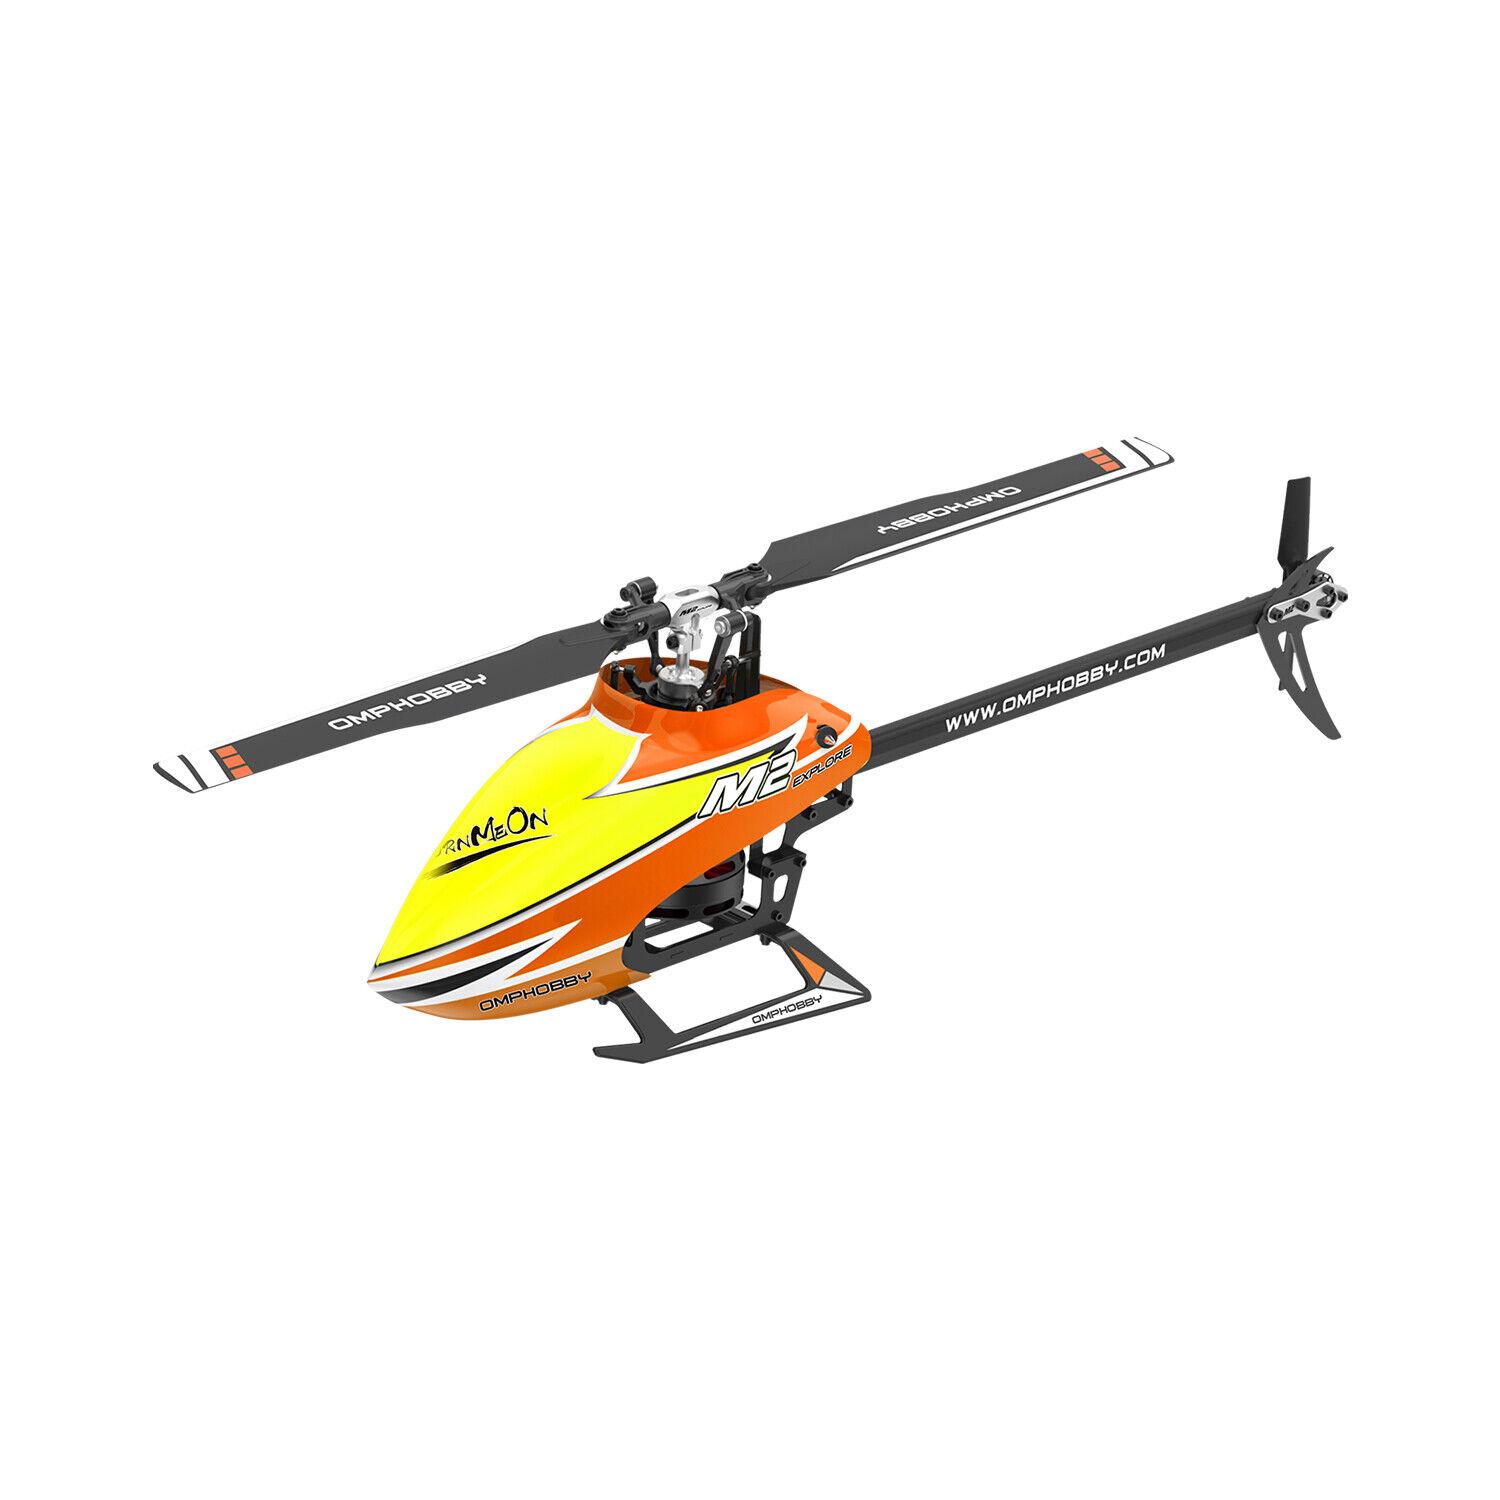 Rc Helicopter M2: Compact & Lightweight.